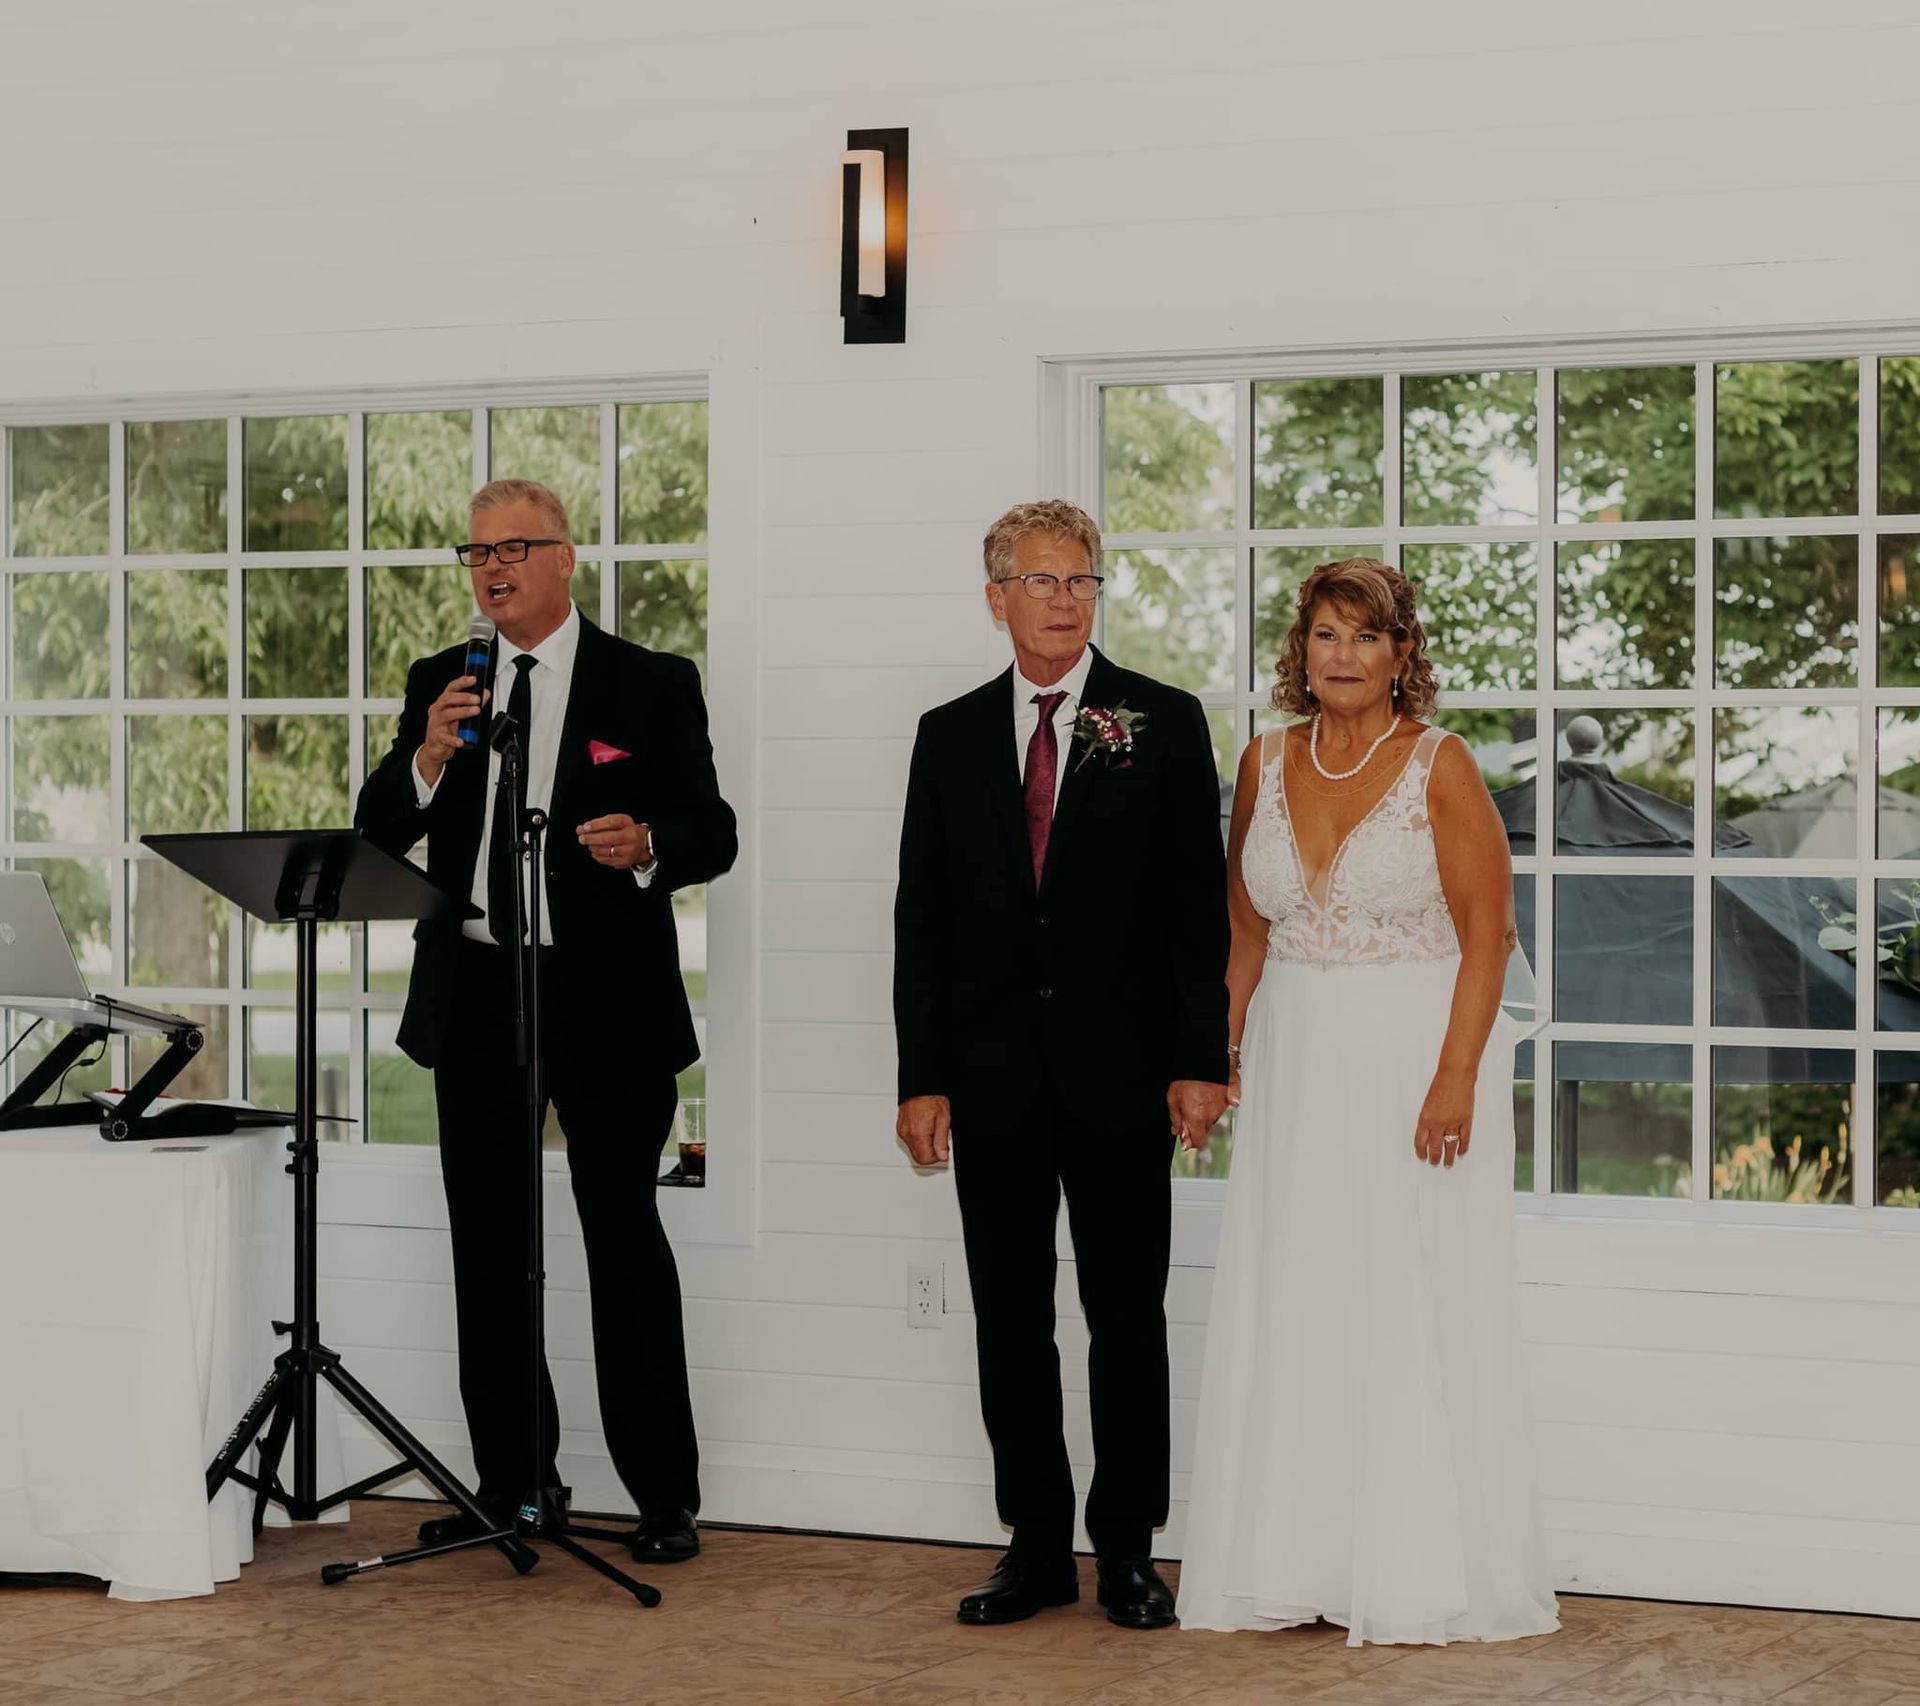 Vince Croci: Crafting Unforgettable Moments at Weddings and Ceremonies